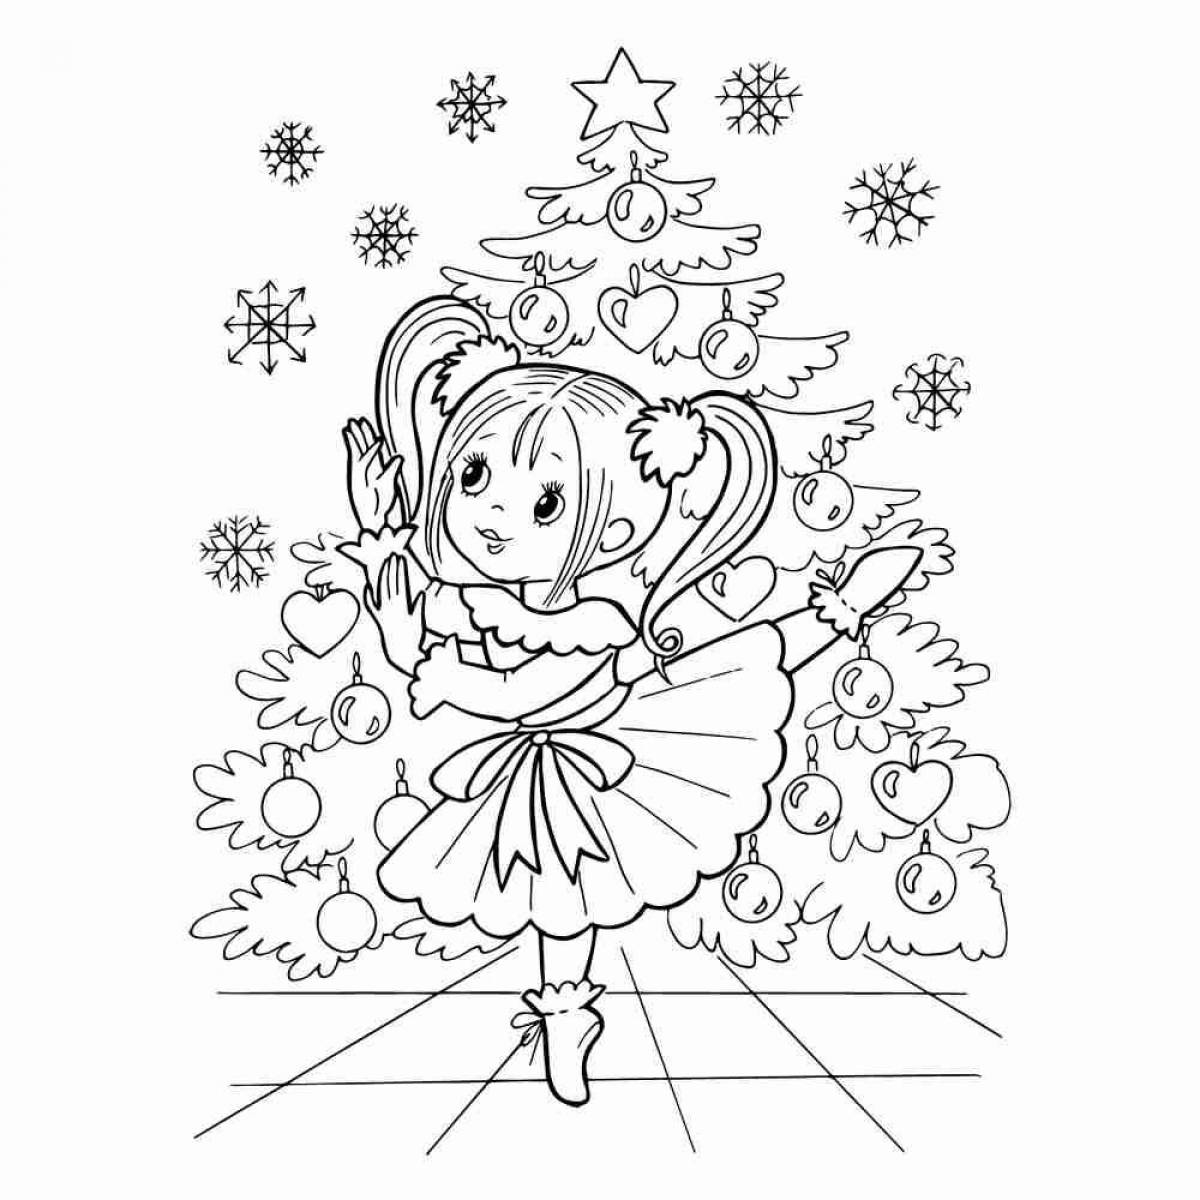 Glowing Christmas coloring book for kids